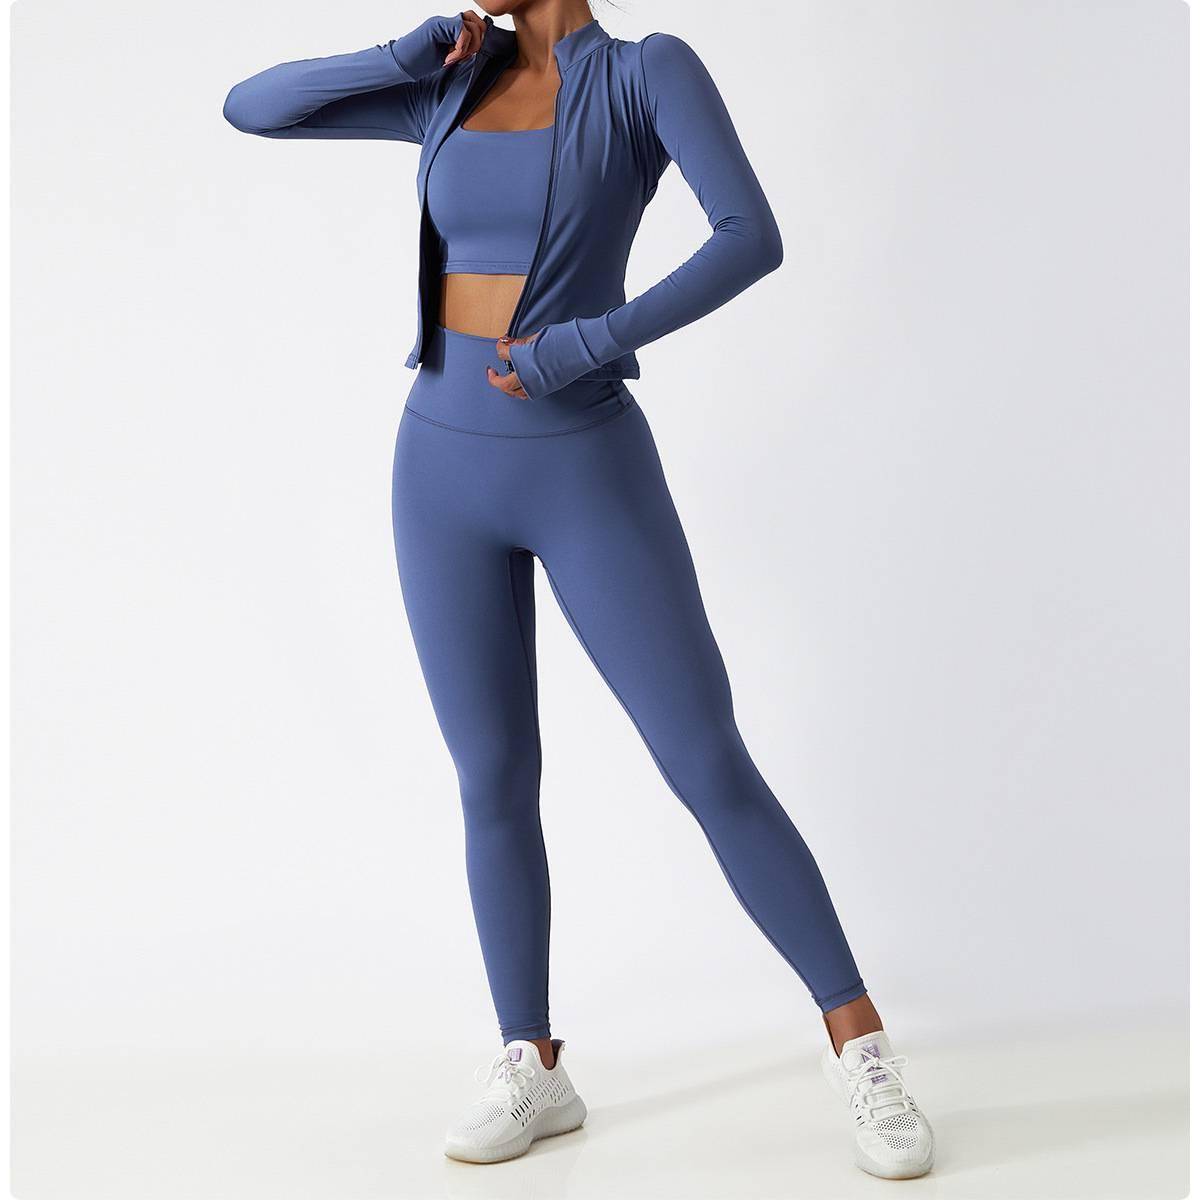 Fitness Clothes and Gym Wear Set for Women Others Size: S|L|M